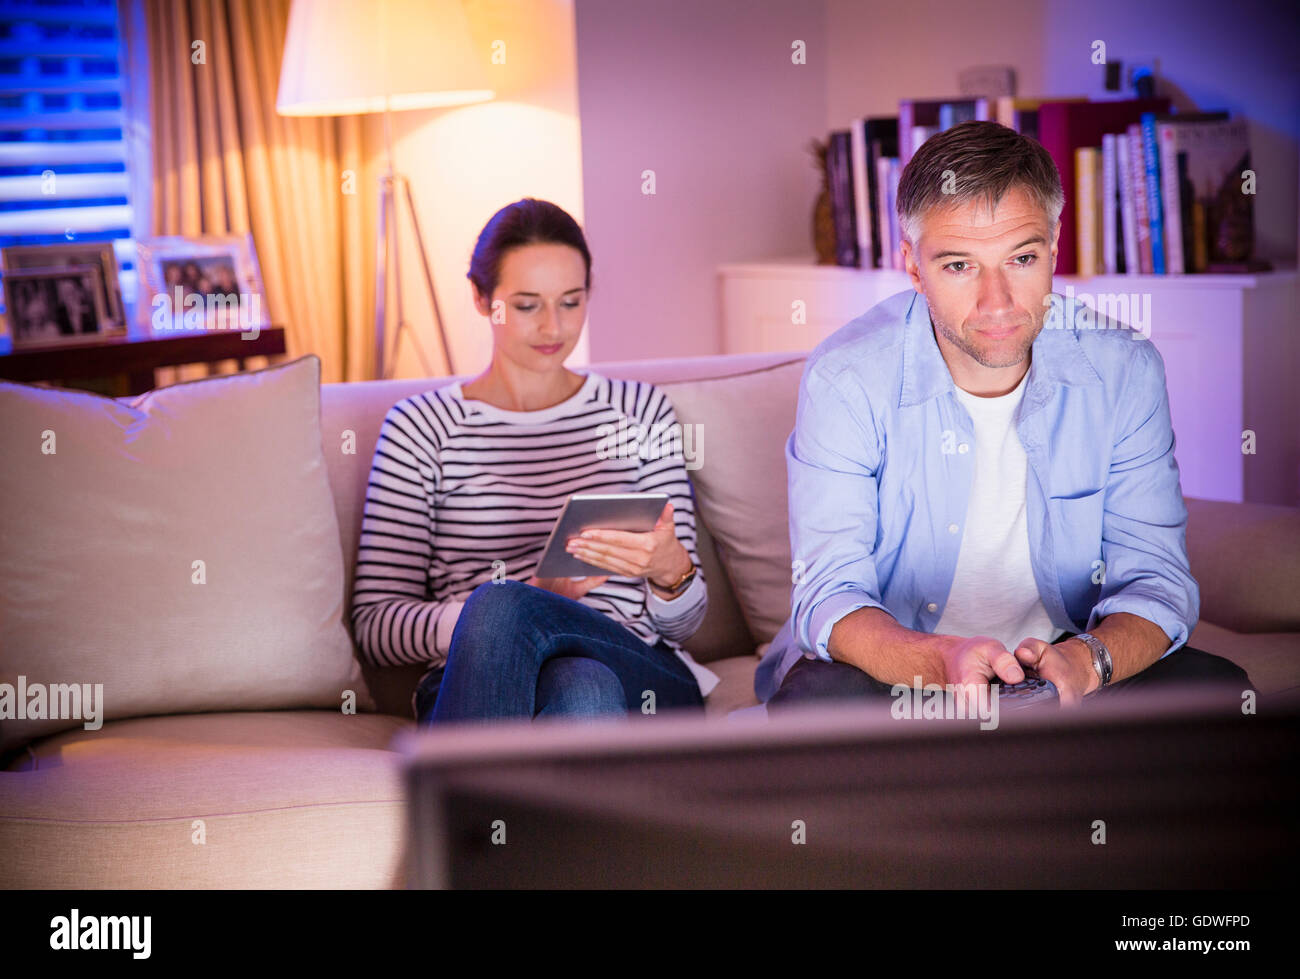 Wife using digital tablet next to husband watching TV in living room Stock Photo